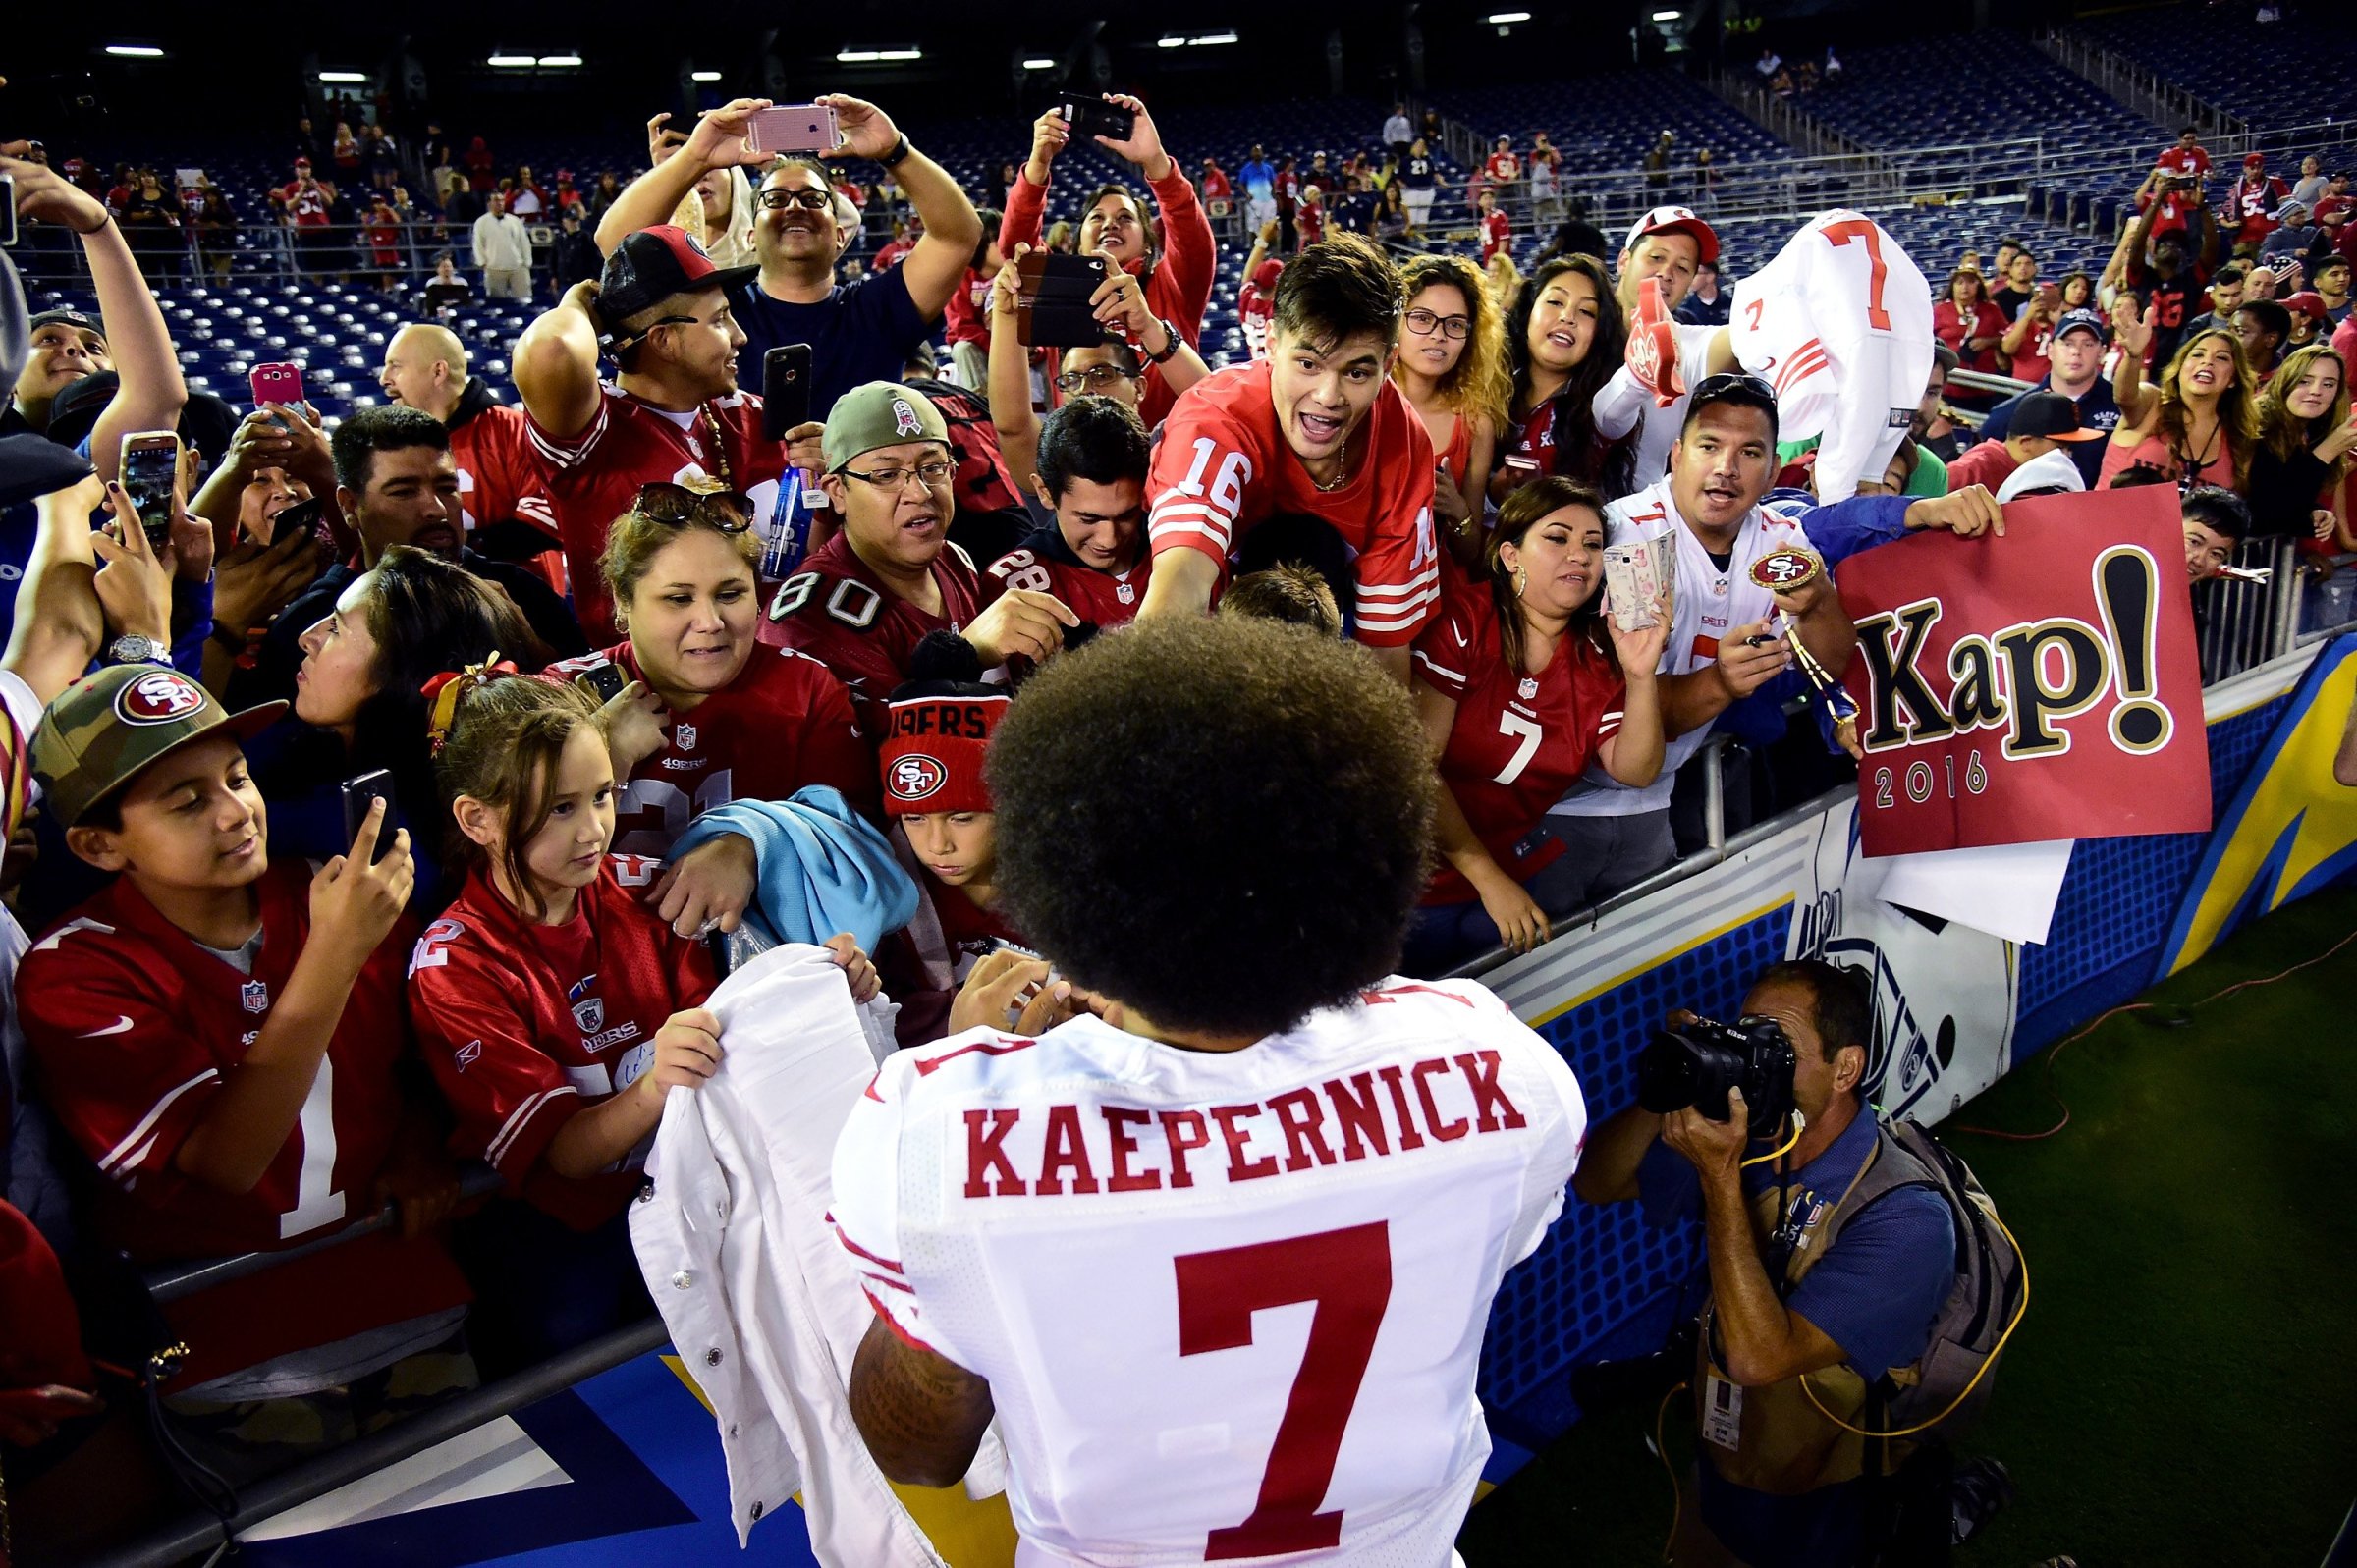 Colin Kaepernick of the San Francisco 49ers signs autographs for fans after a 31-21 win over the San Diego Chargers during a preseason game at Qualcomm Stadium on Sept. 1, 2016 in San Diego.